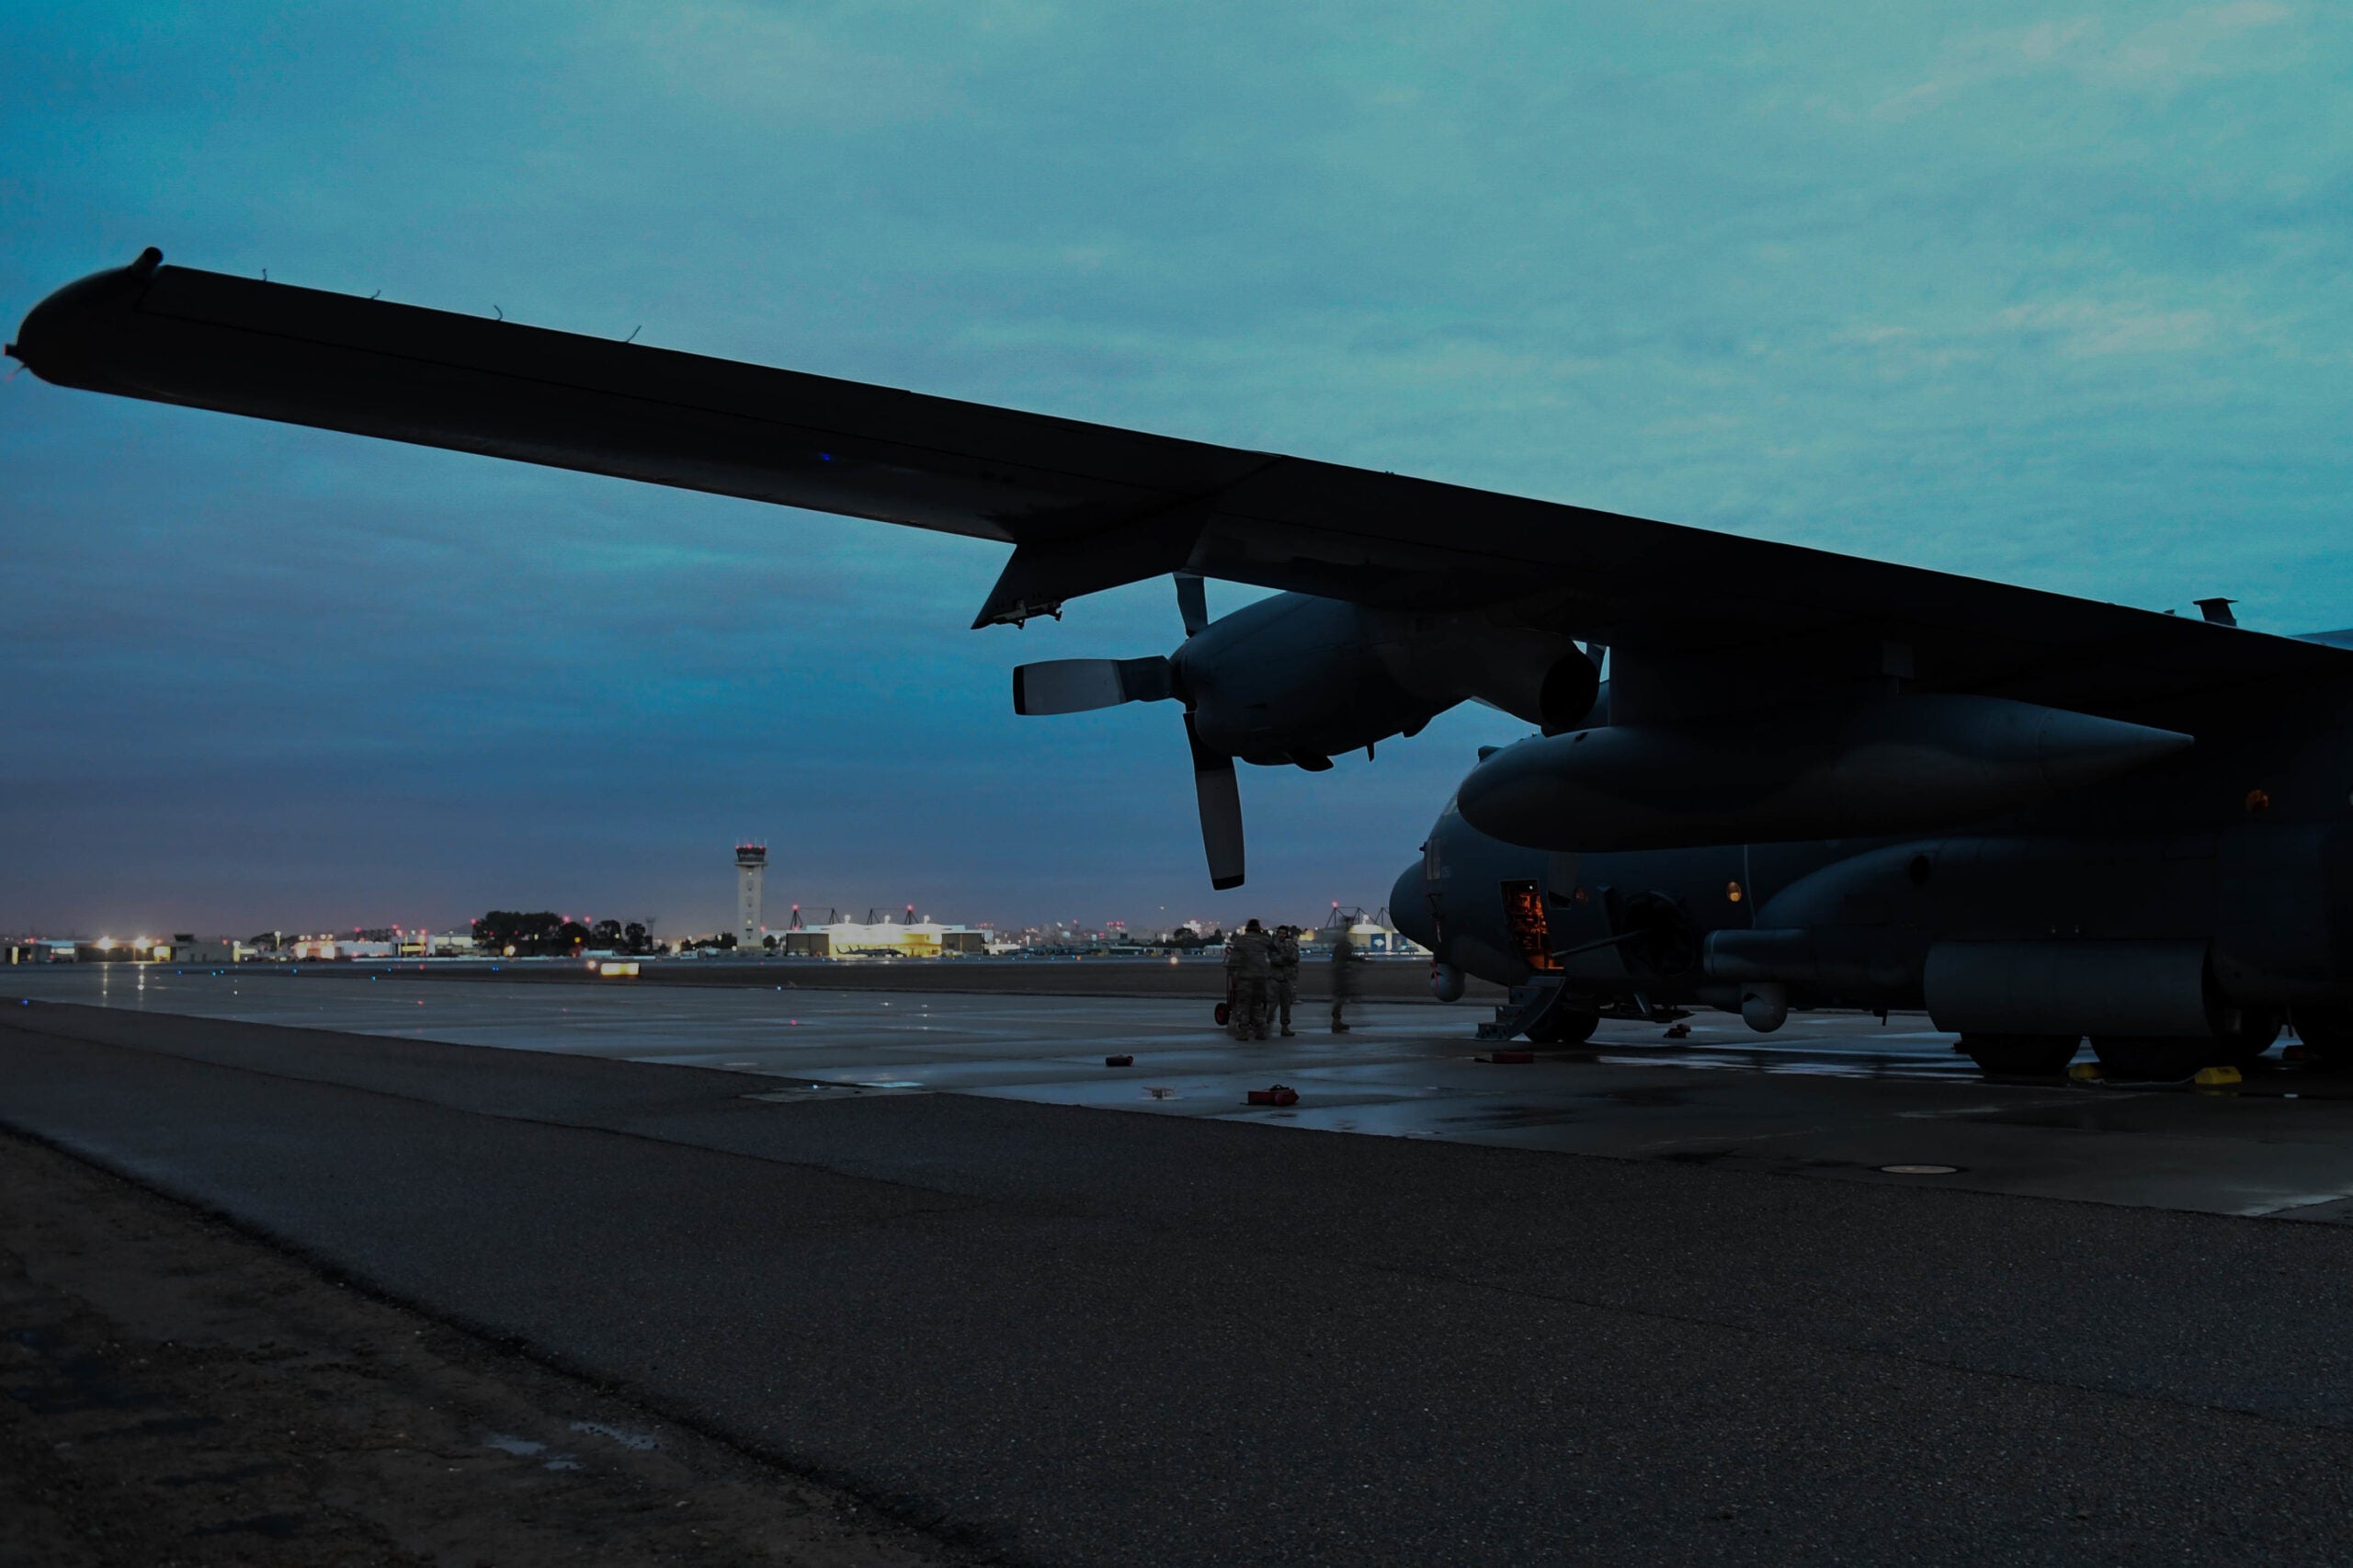 An Aircrew from the 16th Special Operations Squadron at Cannon Air Force Base, N.M., lands an AC-130W Stinger II to participate in Emerald Warrior/Trident at the Naval Air Station North Island, Calif., January 15, 2019. Emerald Warrior/Trident is the largest joint special operations exercise where U.S. Special Operations Command forces train to respond to various threats across the spectrum of conflict. (U.S. Air Force photo by Staff Sgt. Erin Piazza)